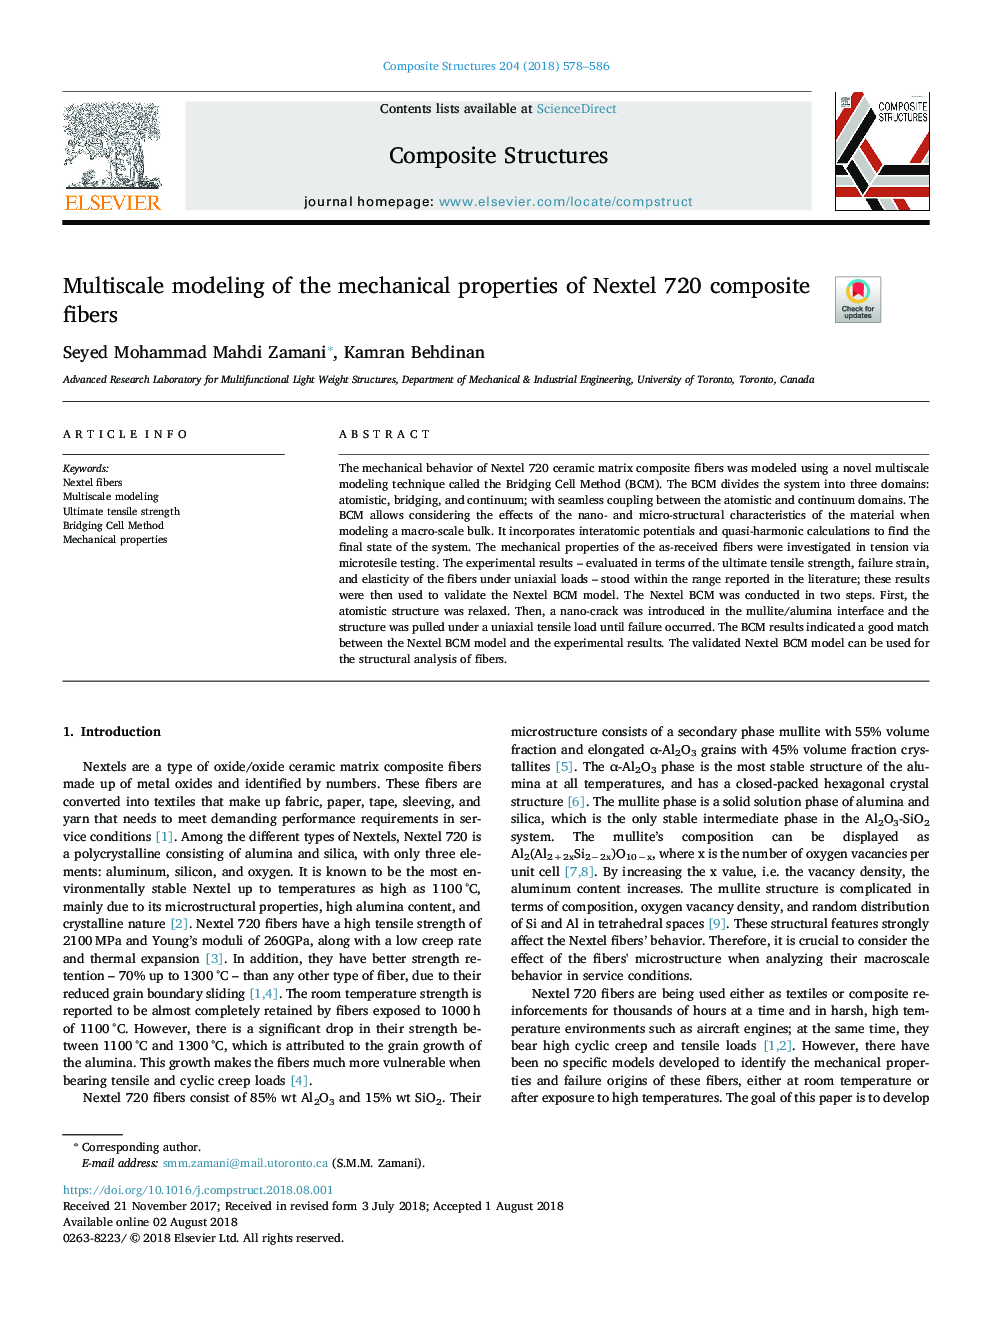 Multiscale modeling of the mechanical properties of Nextel 720 composite fibers